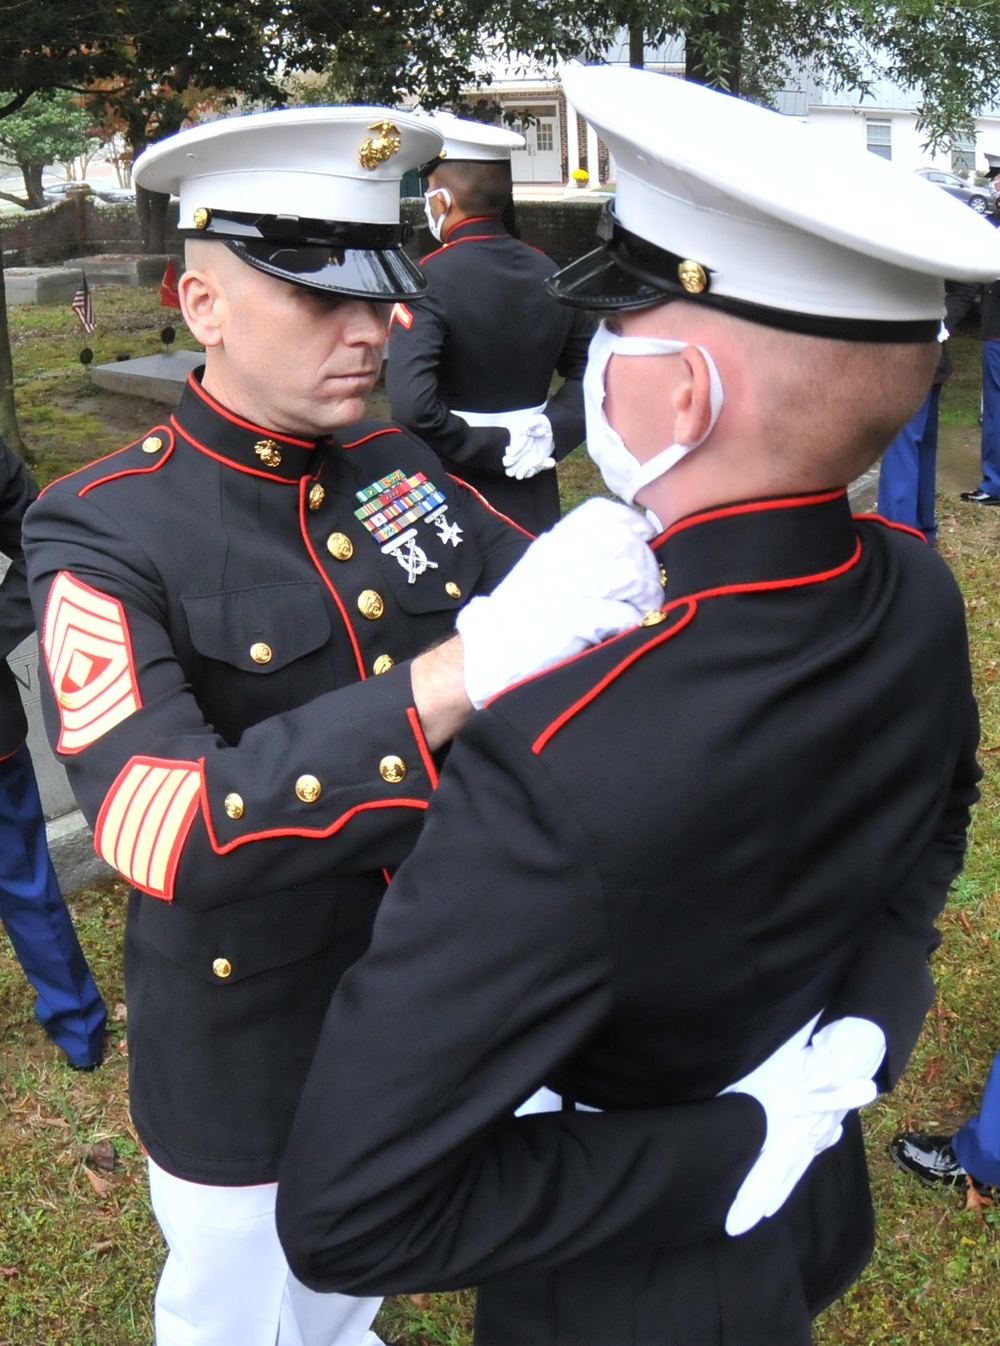 Dressing up tradition: COVID-19 prompts Marines to put polish on ‘Chesty’ Puller event